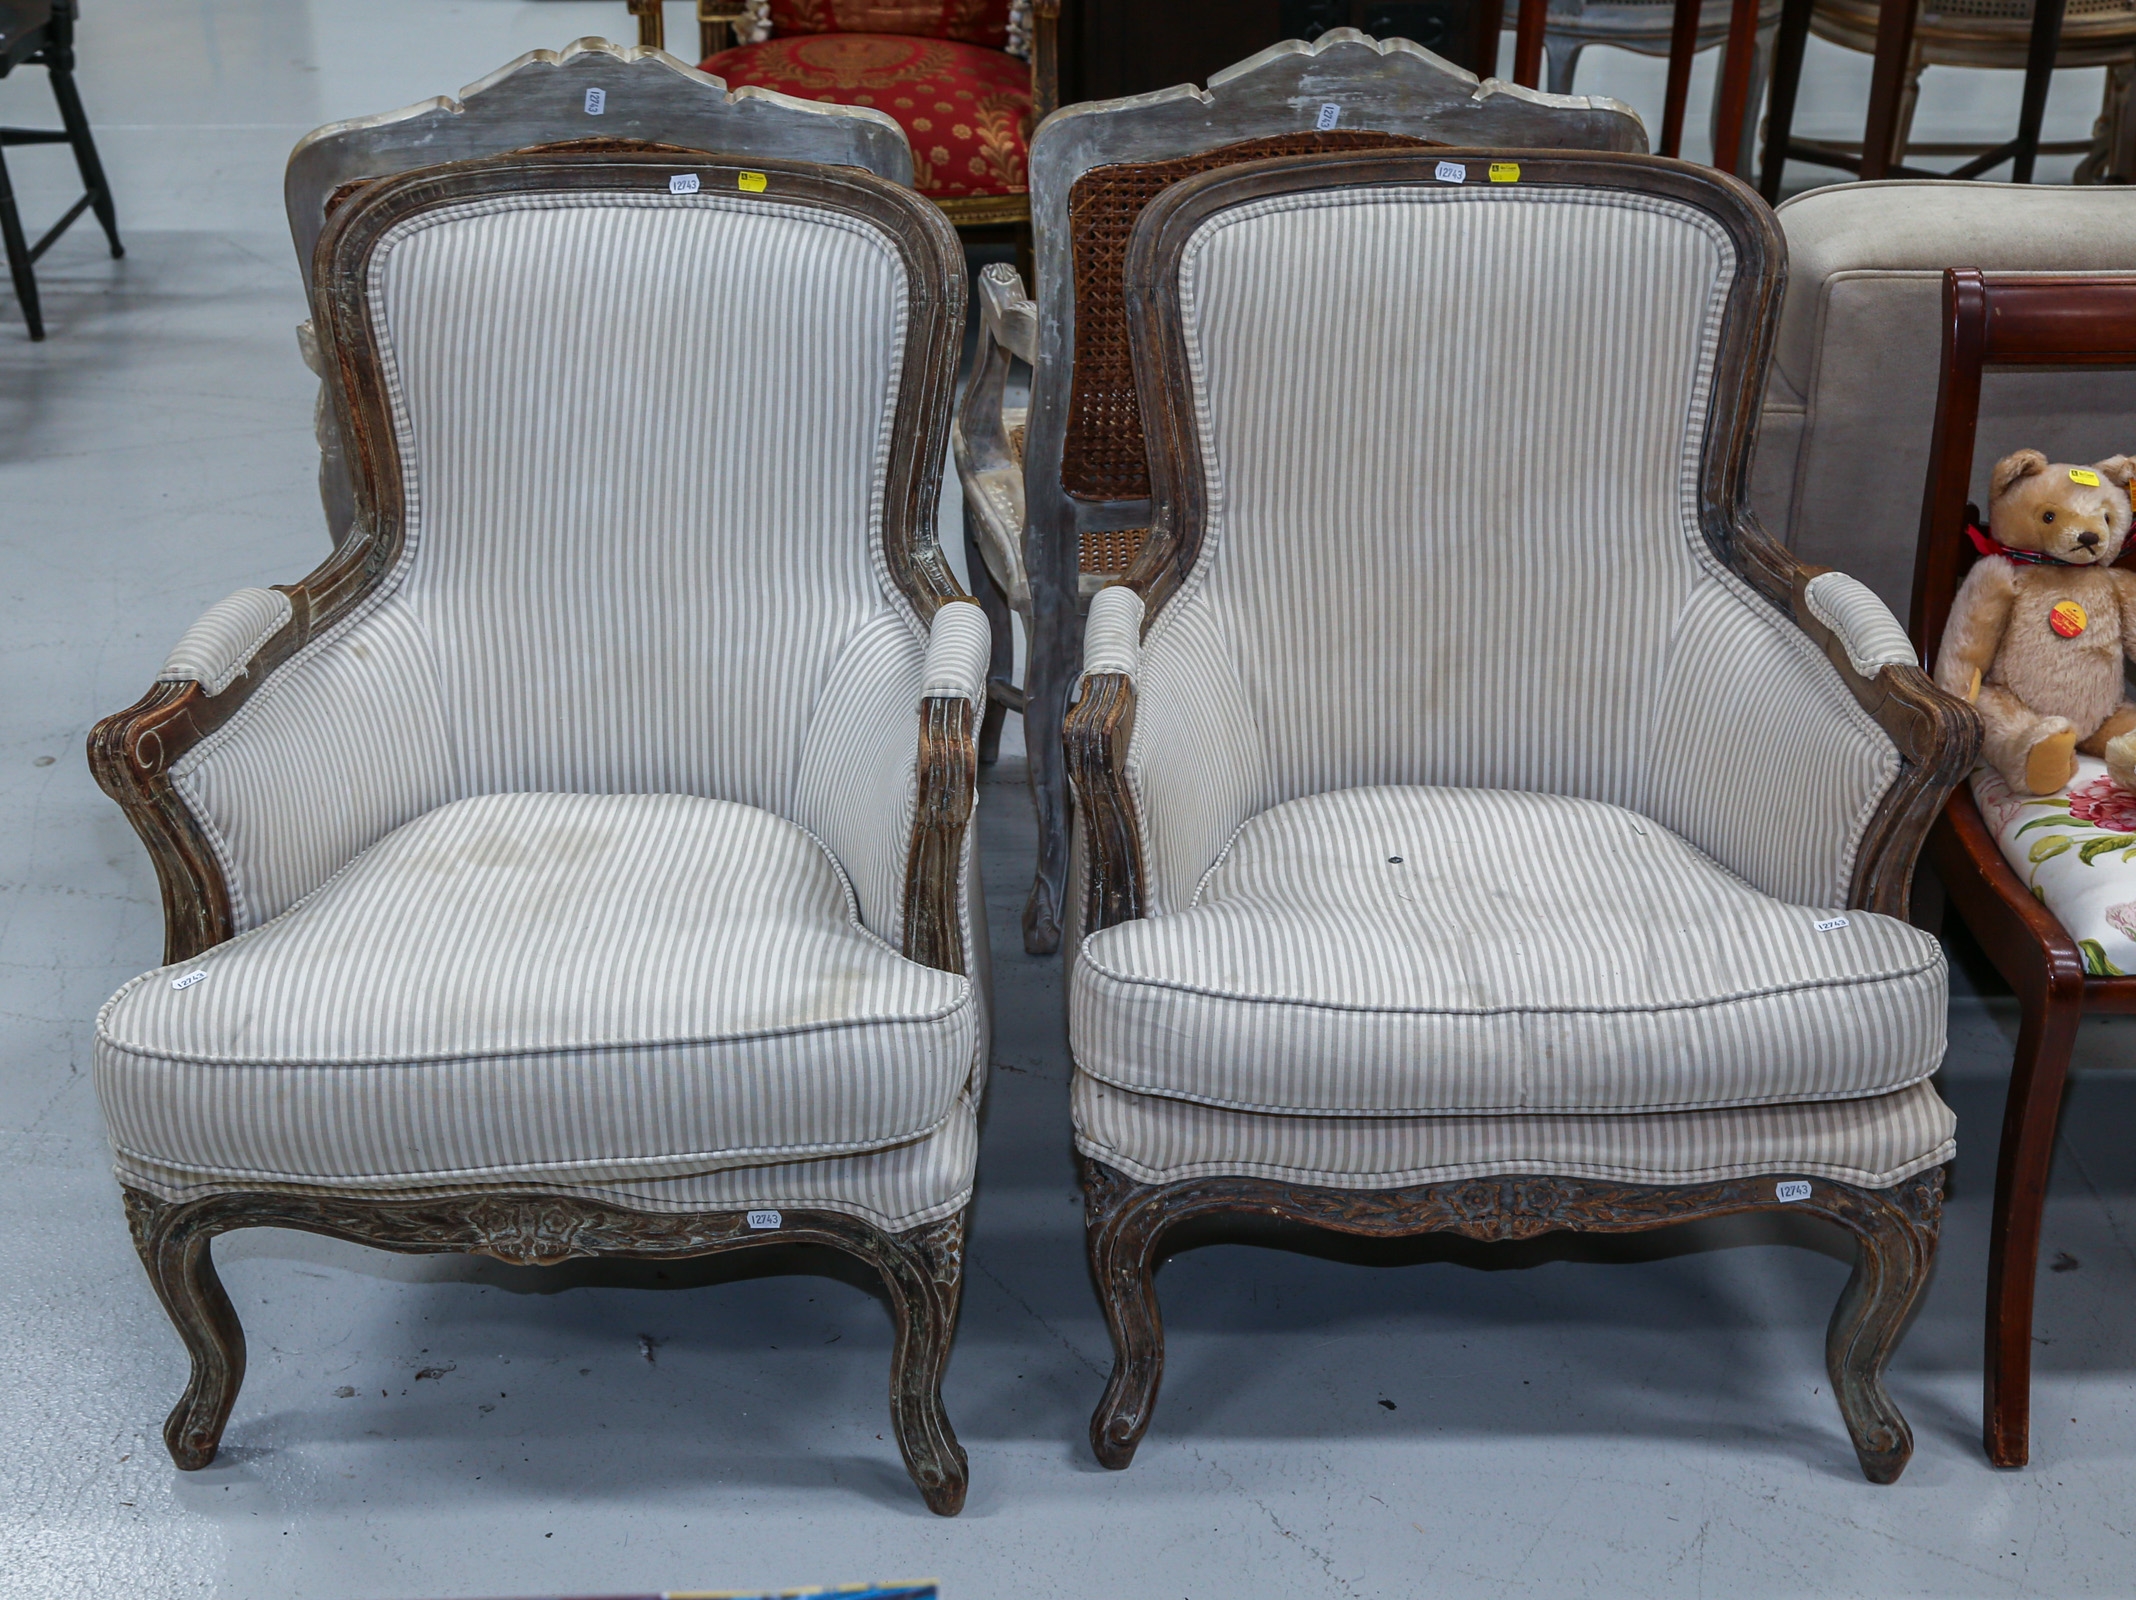 CENTURY FRENCH LOUIS XV STYLE ARM CHAIR